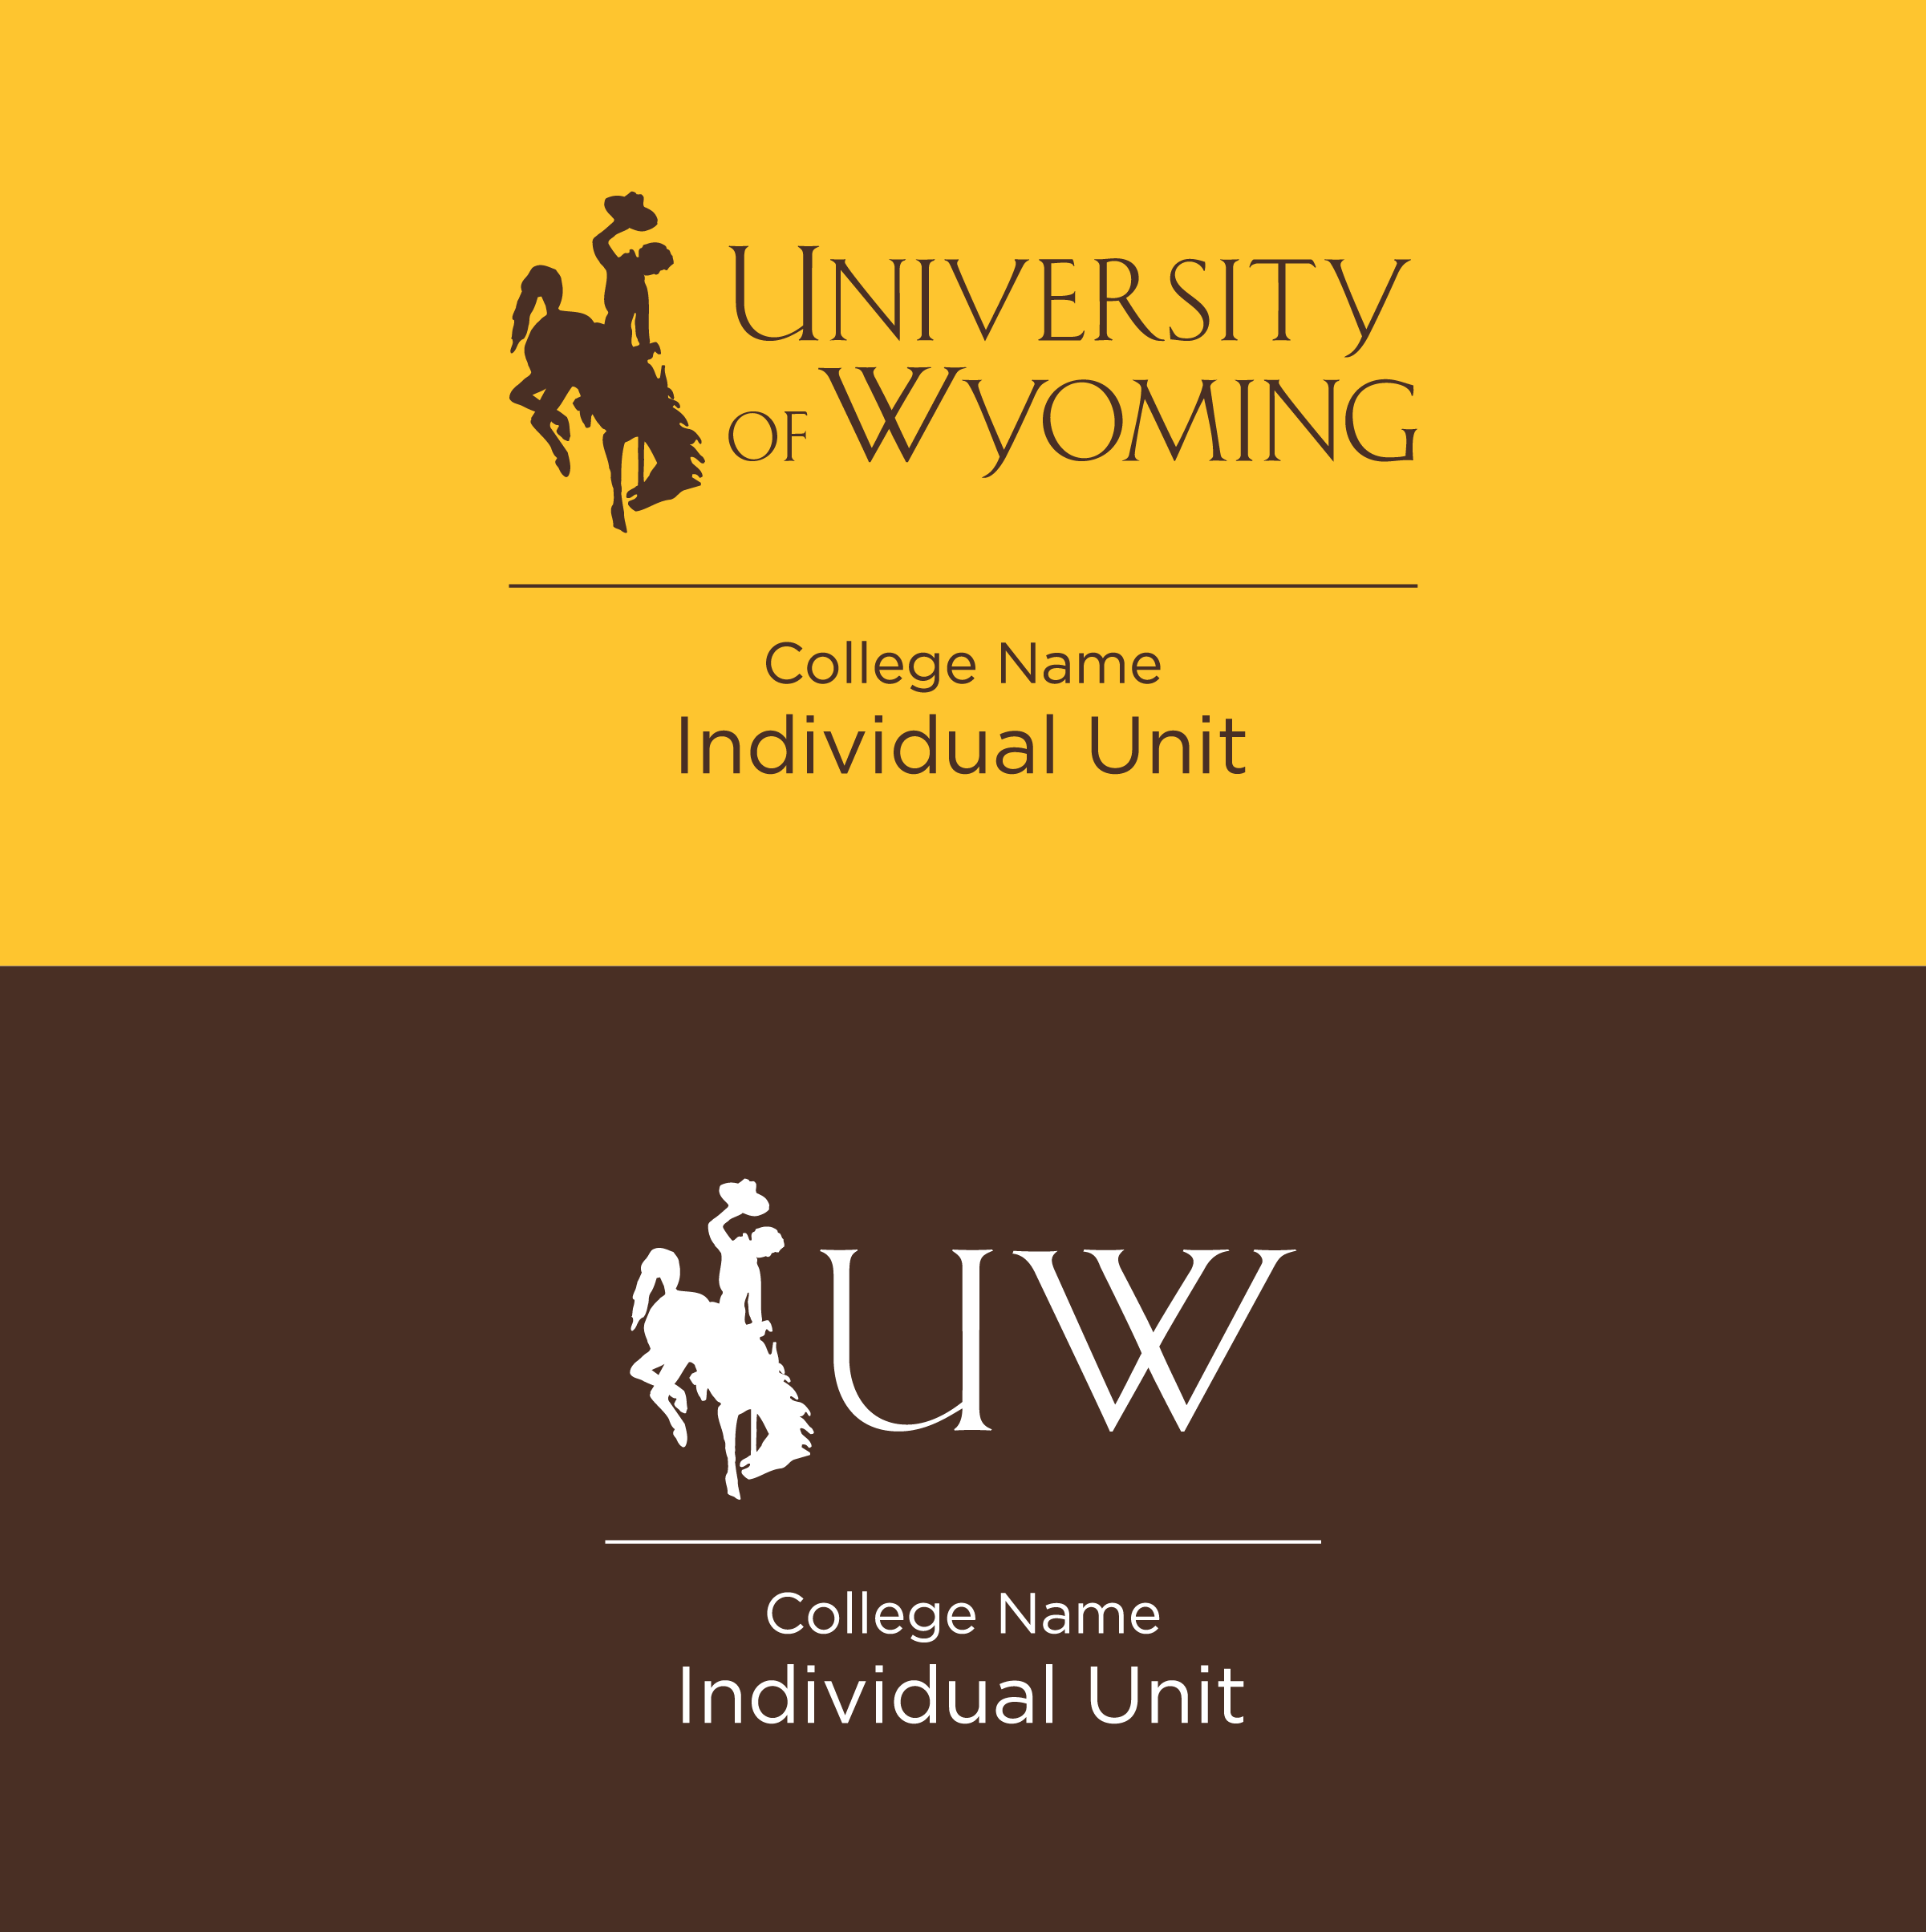 University of Wyoming logo with college name and unit, stacked